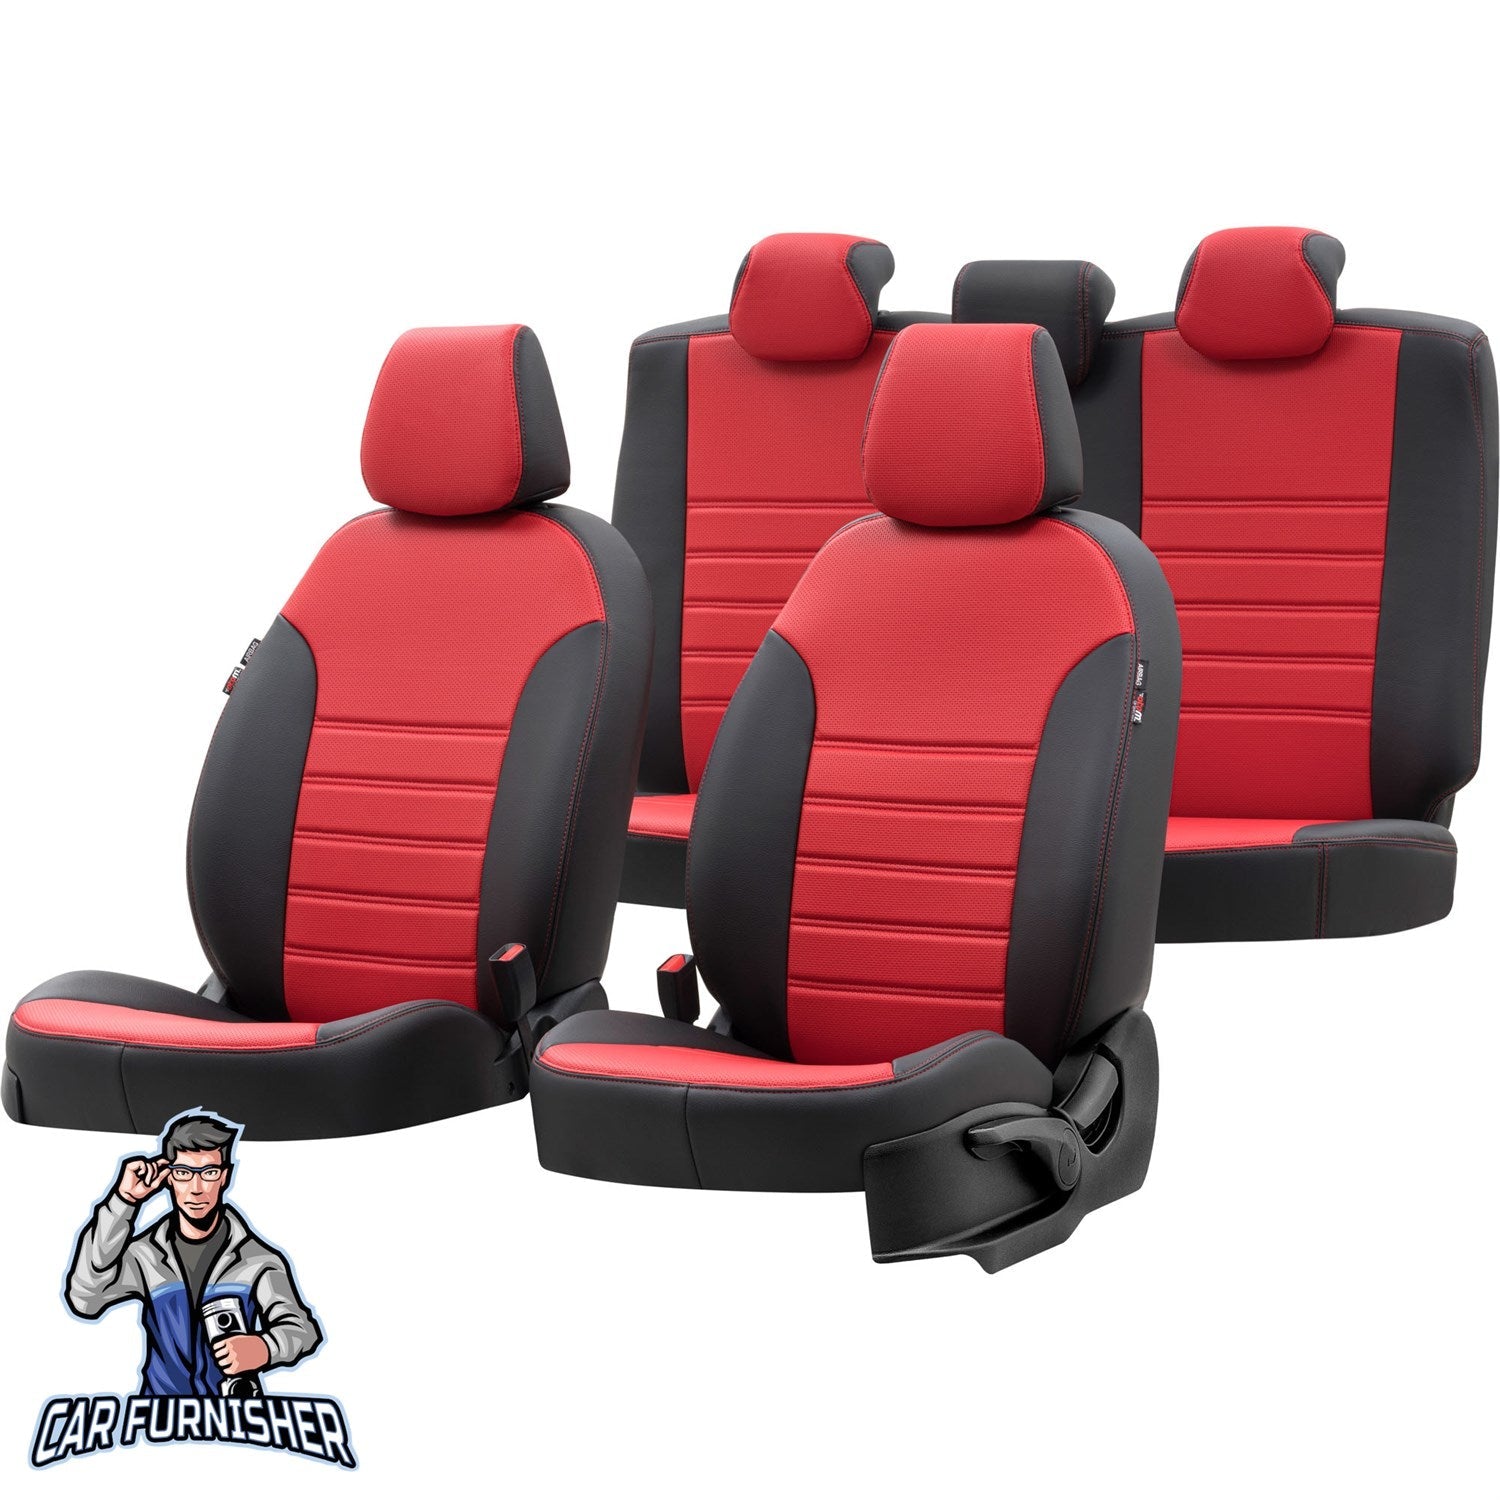 Kia Niro Seat Covers New York Leather Design Red Leather